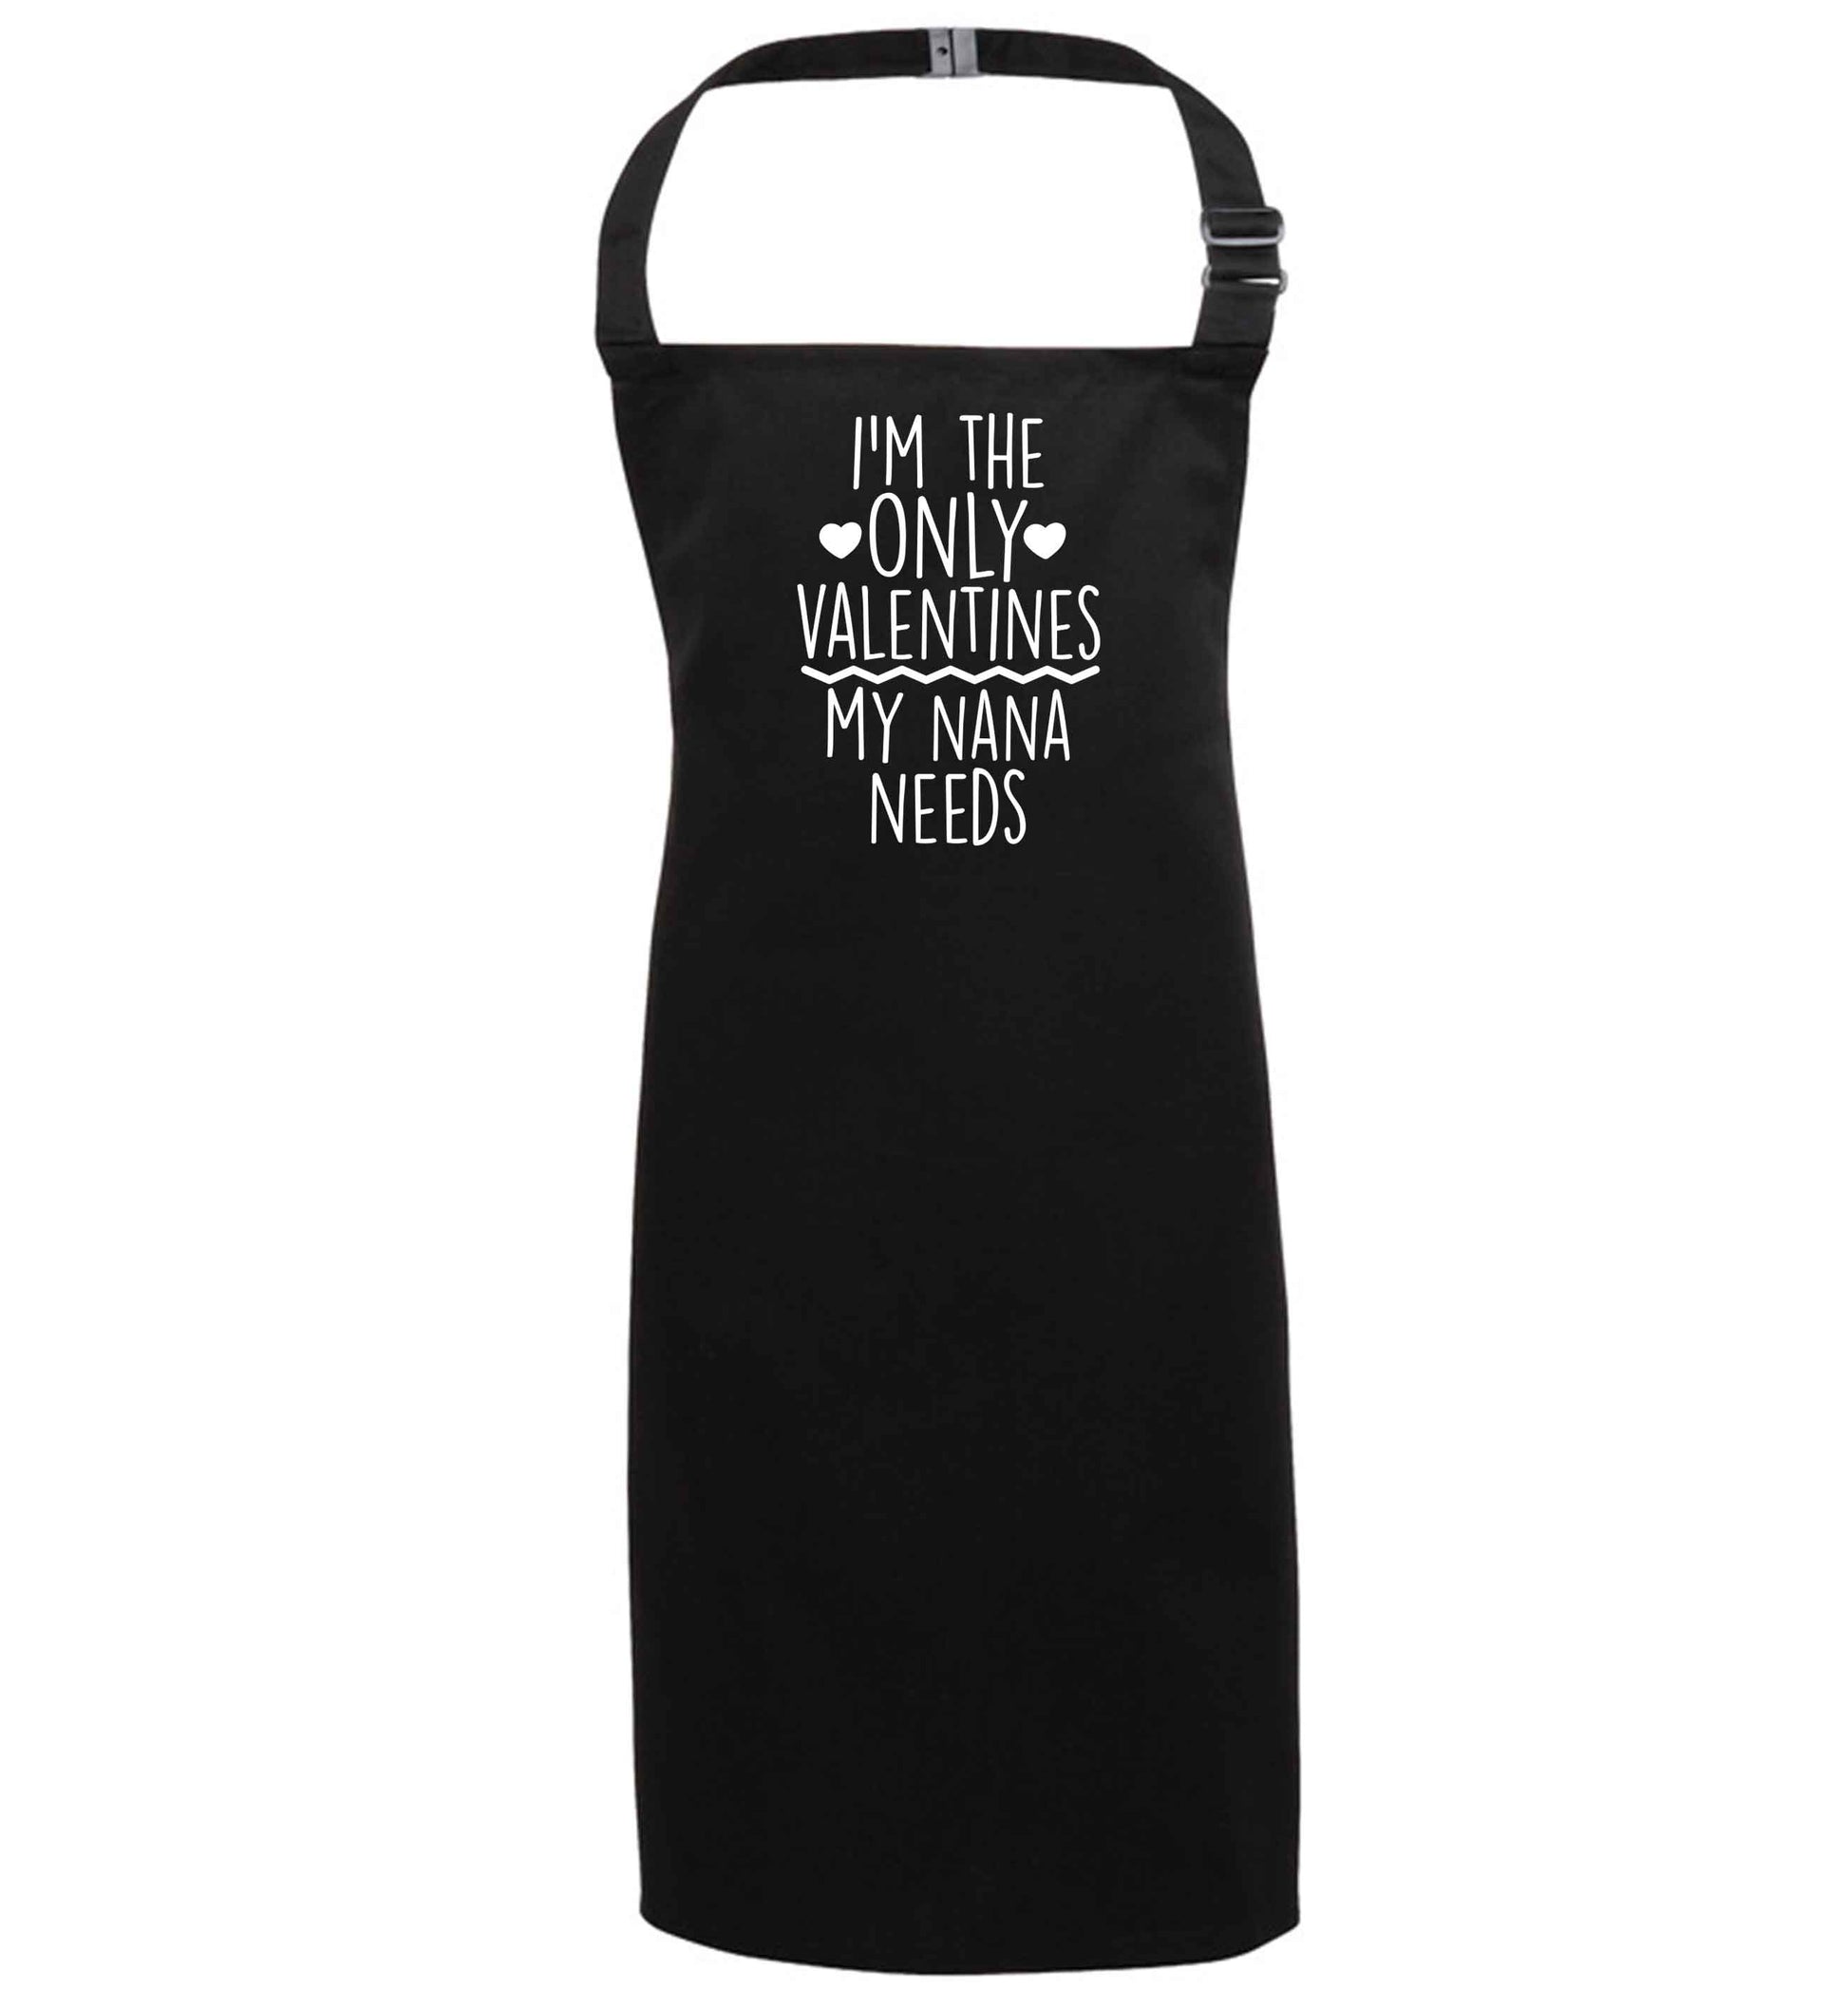 I'm the only valentines my nana needs black apron 7-10 years